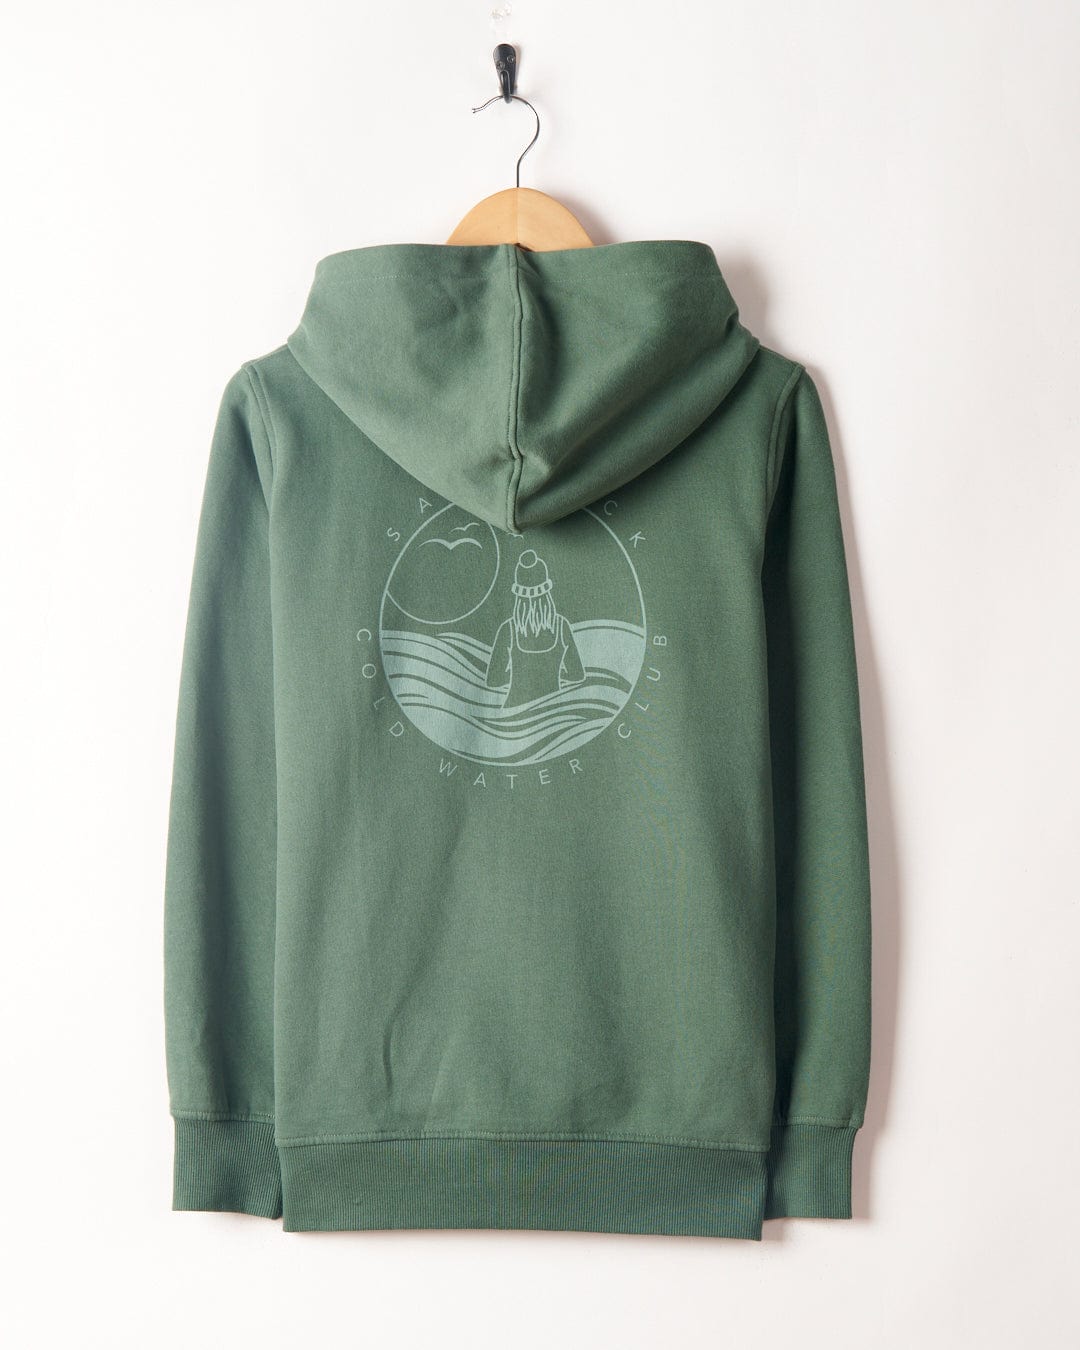 Green Coldwater Club hoodie from Saltrock, hanging on wooden hanger against a white background.